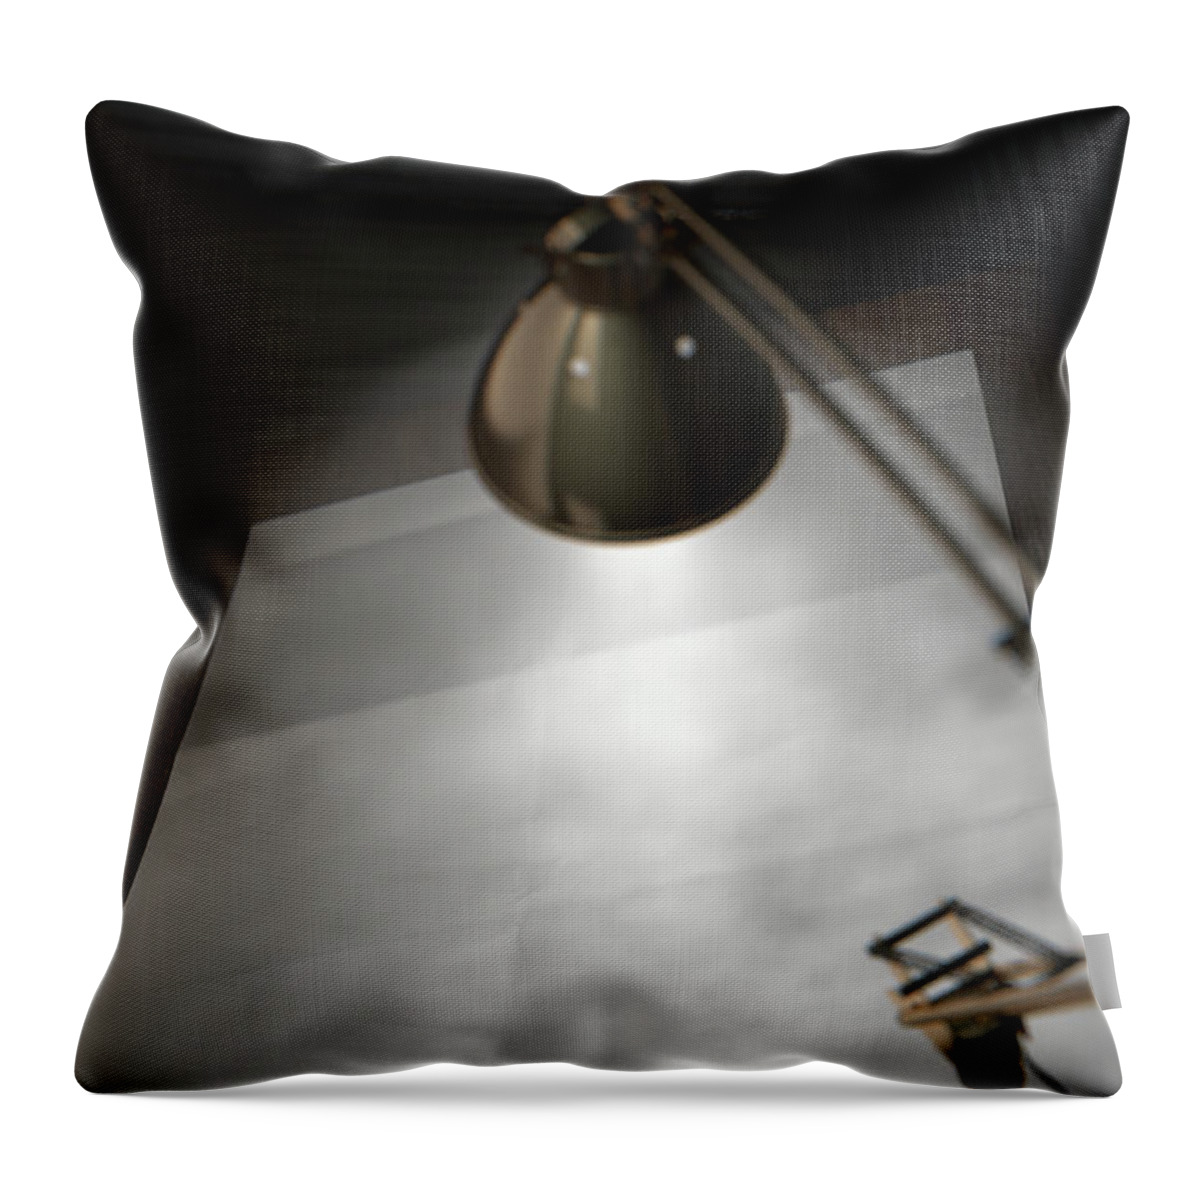 Architect Throw Pillow featuring the digital art Vintage Desk and Lamp #9 by Allan Swart